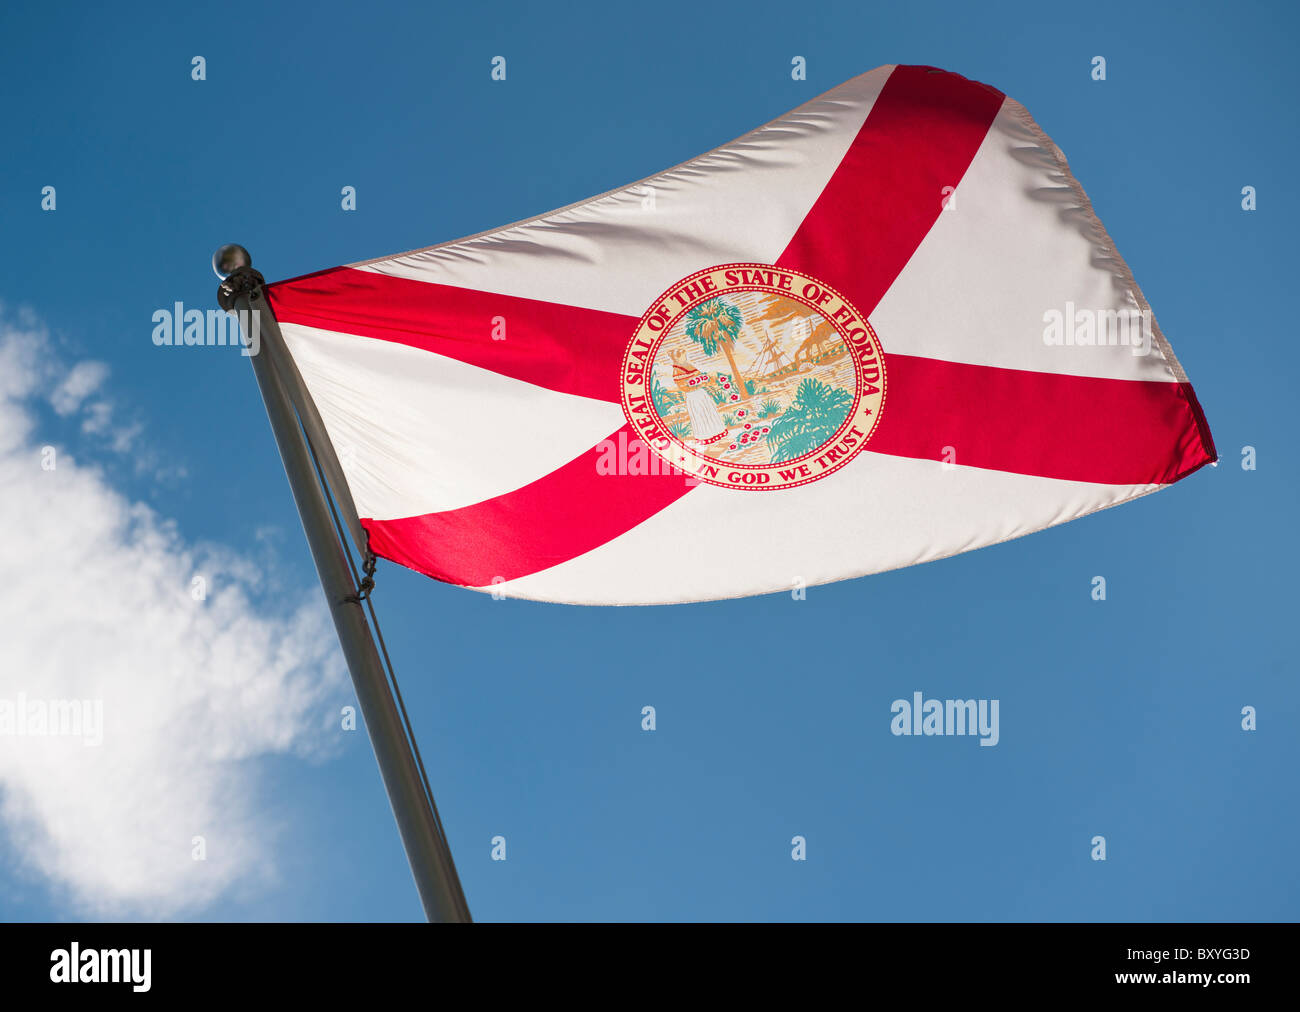 New York State flag against sky Banque D'Images